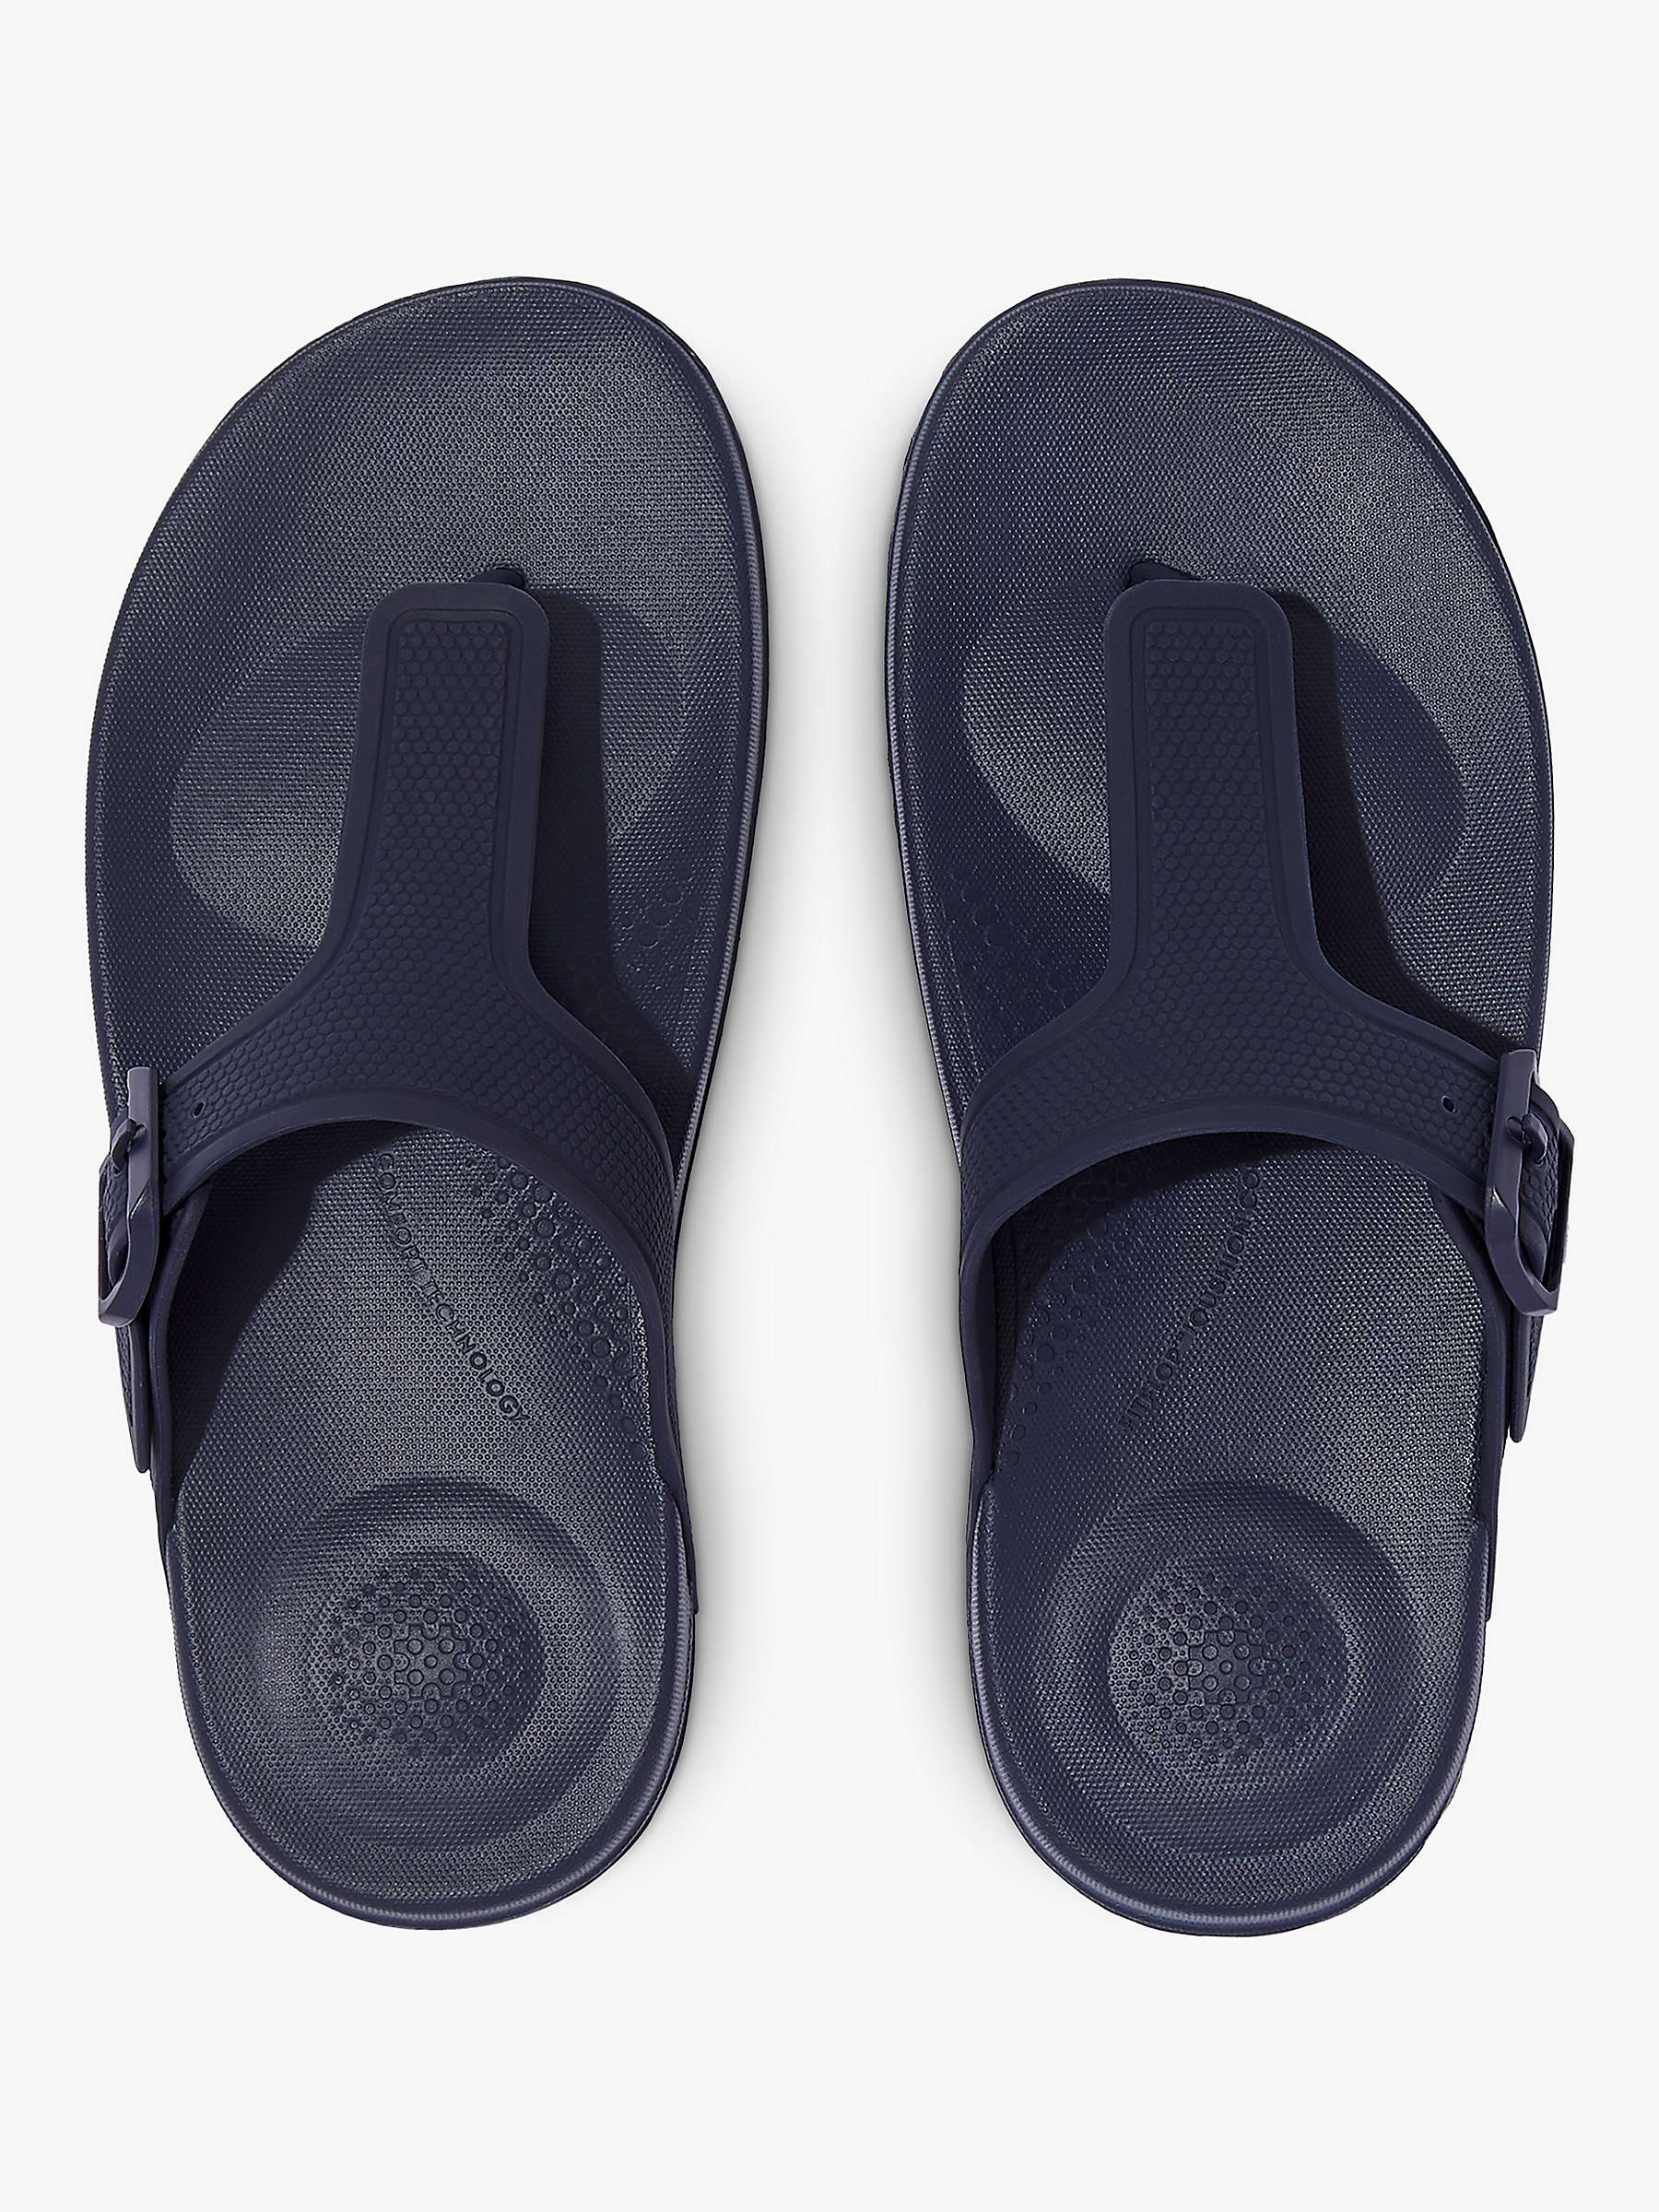 FitFlop Buckle Flip Flops, Midnight Navy at John Lewis & Partners